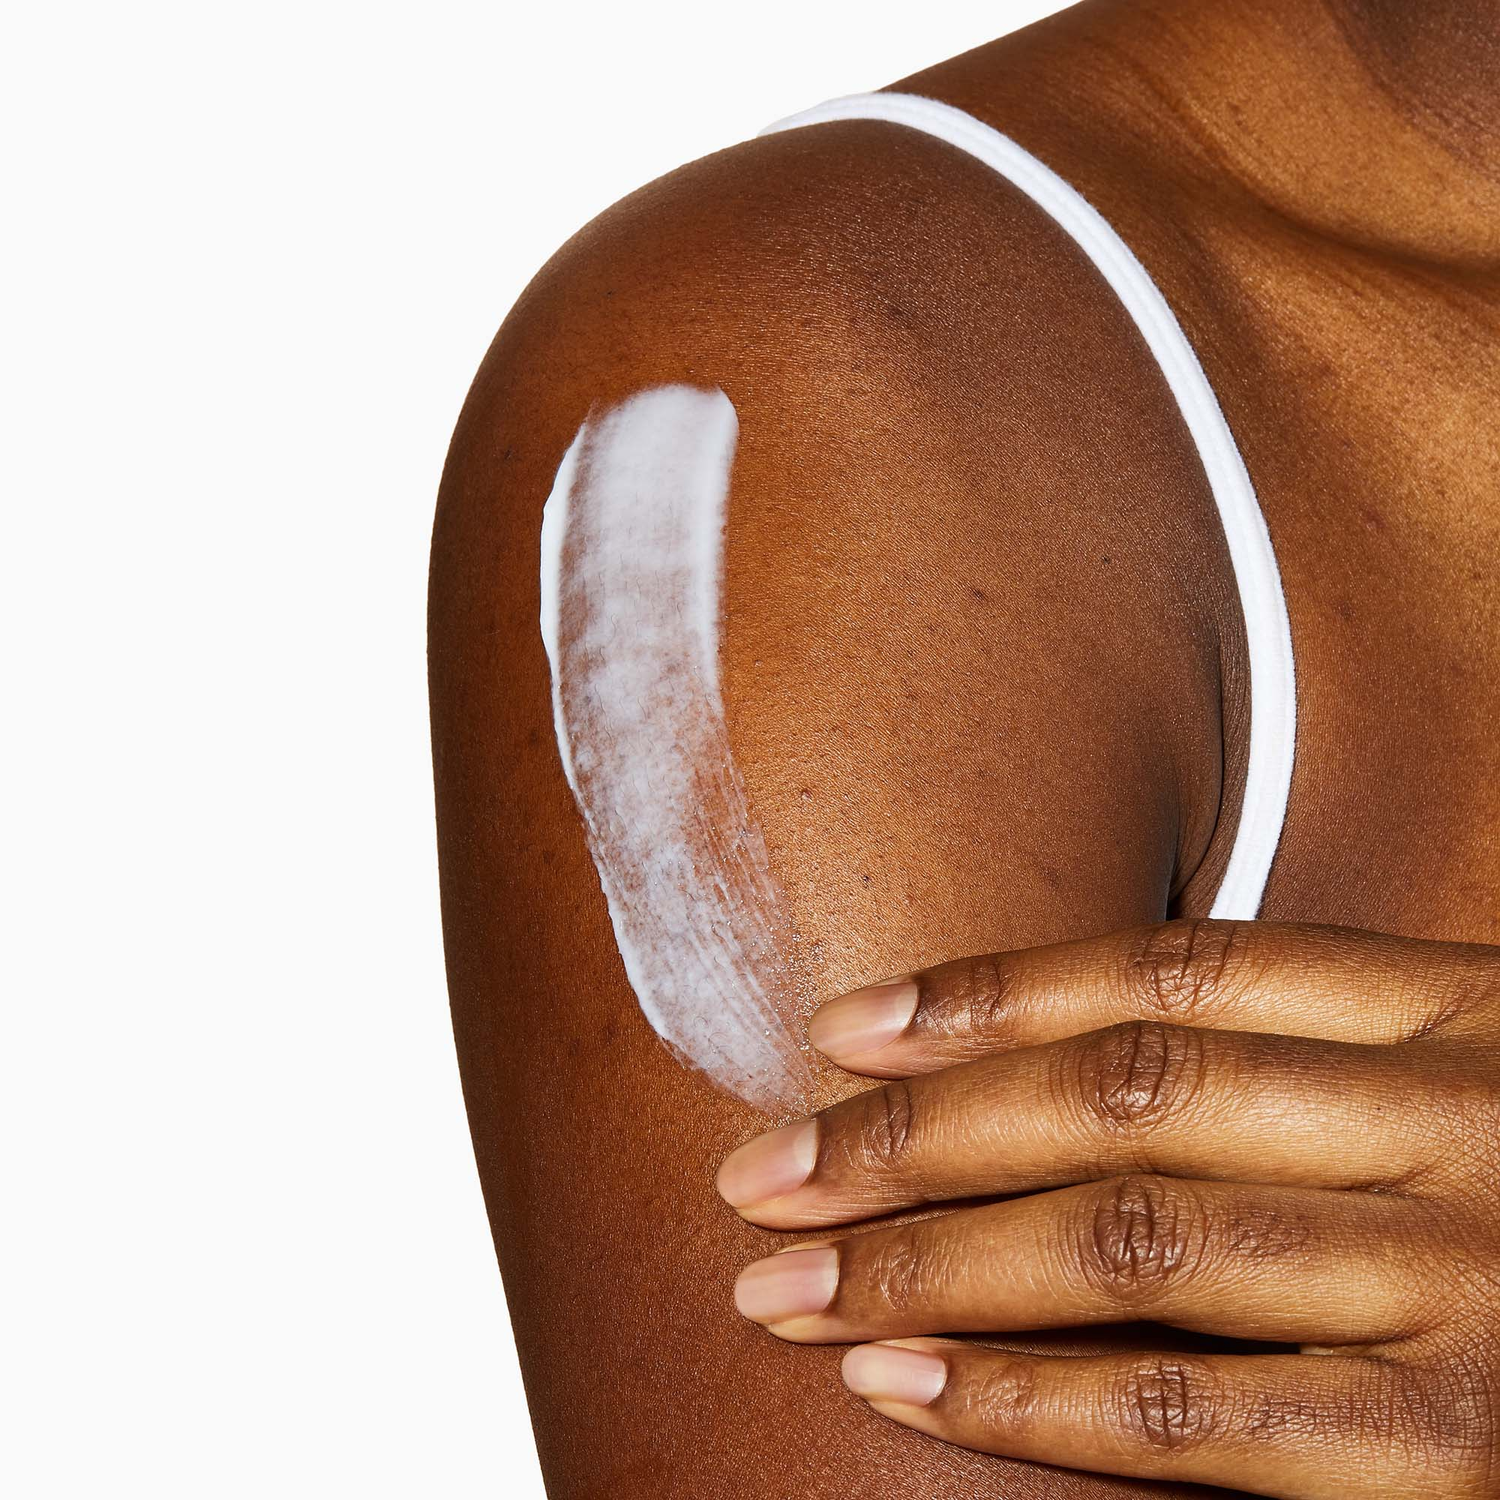 CeraVe Moisturising Cream product being used